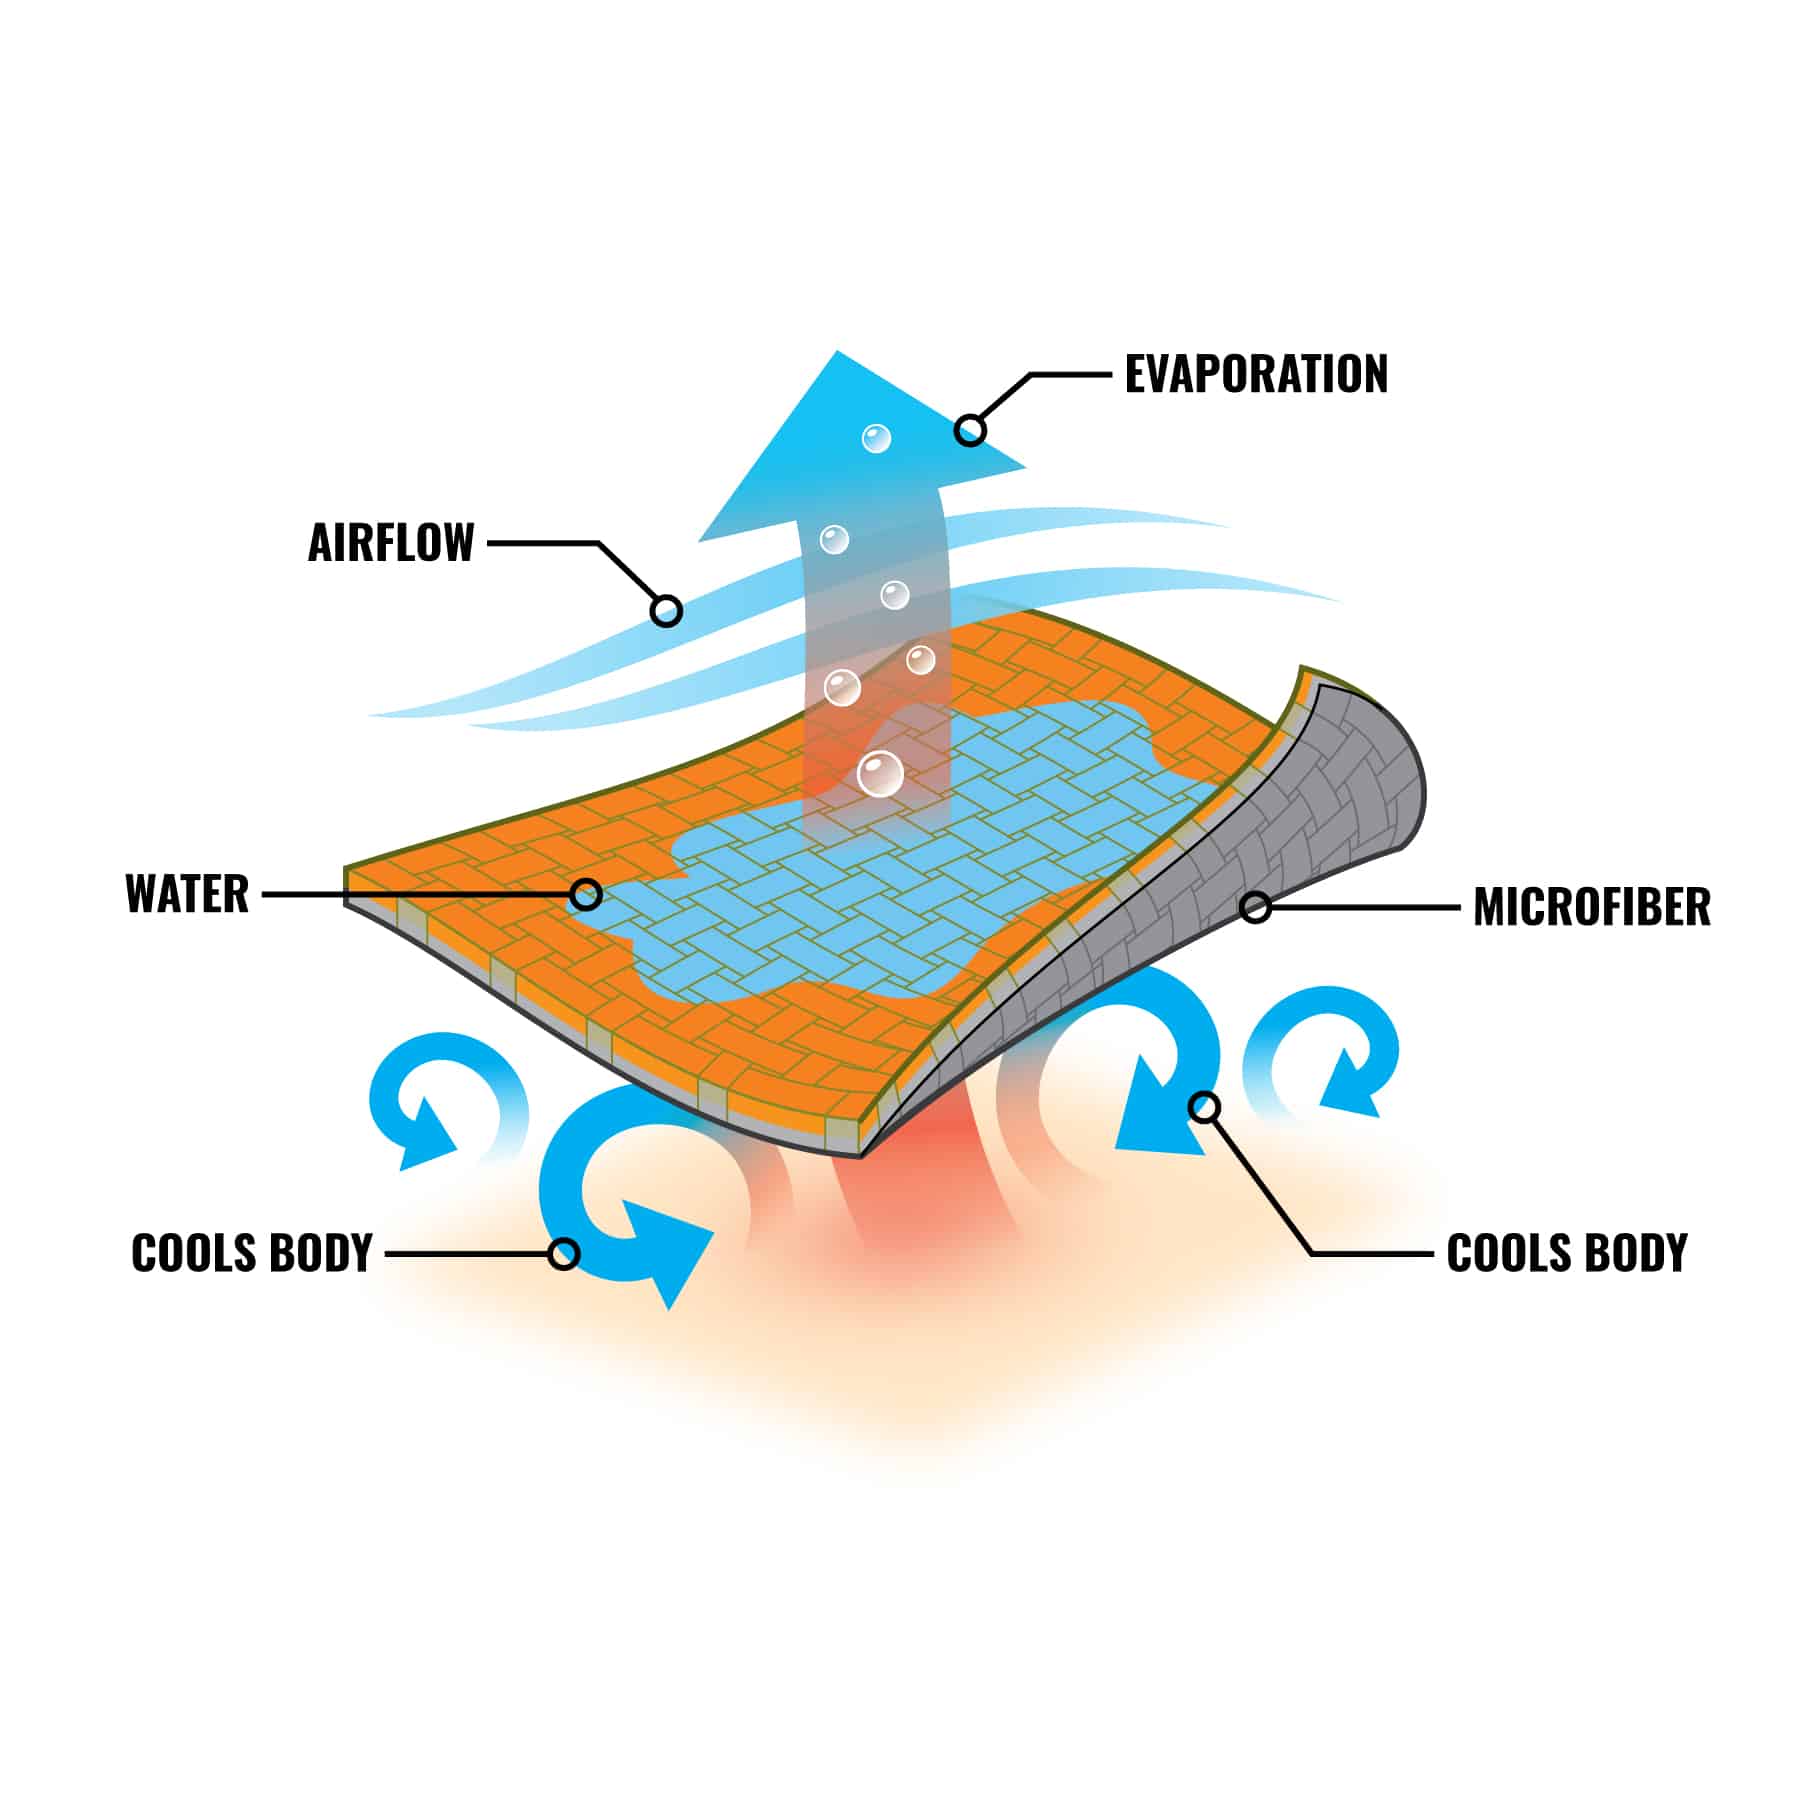 Airflow and water plus evaporation create cooling affect on body via microfiber material